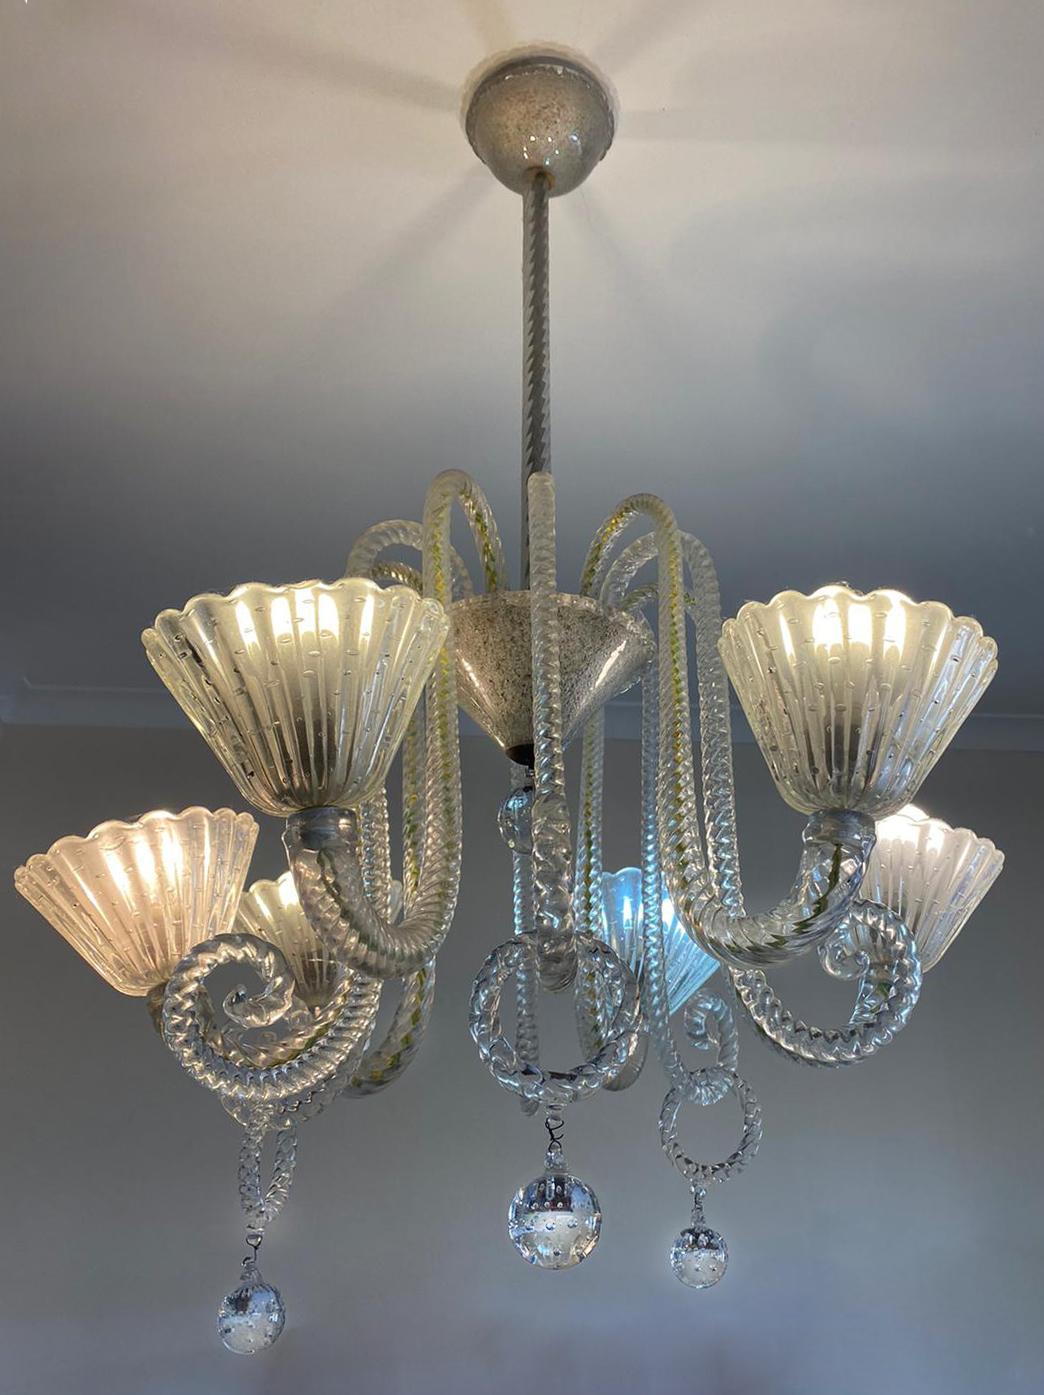 Elegant Murano chandelier by the famous Venetian master Ercole Barovier.
From the private collection of Baron Von Plant.
 